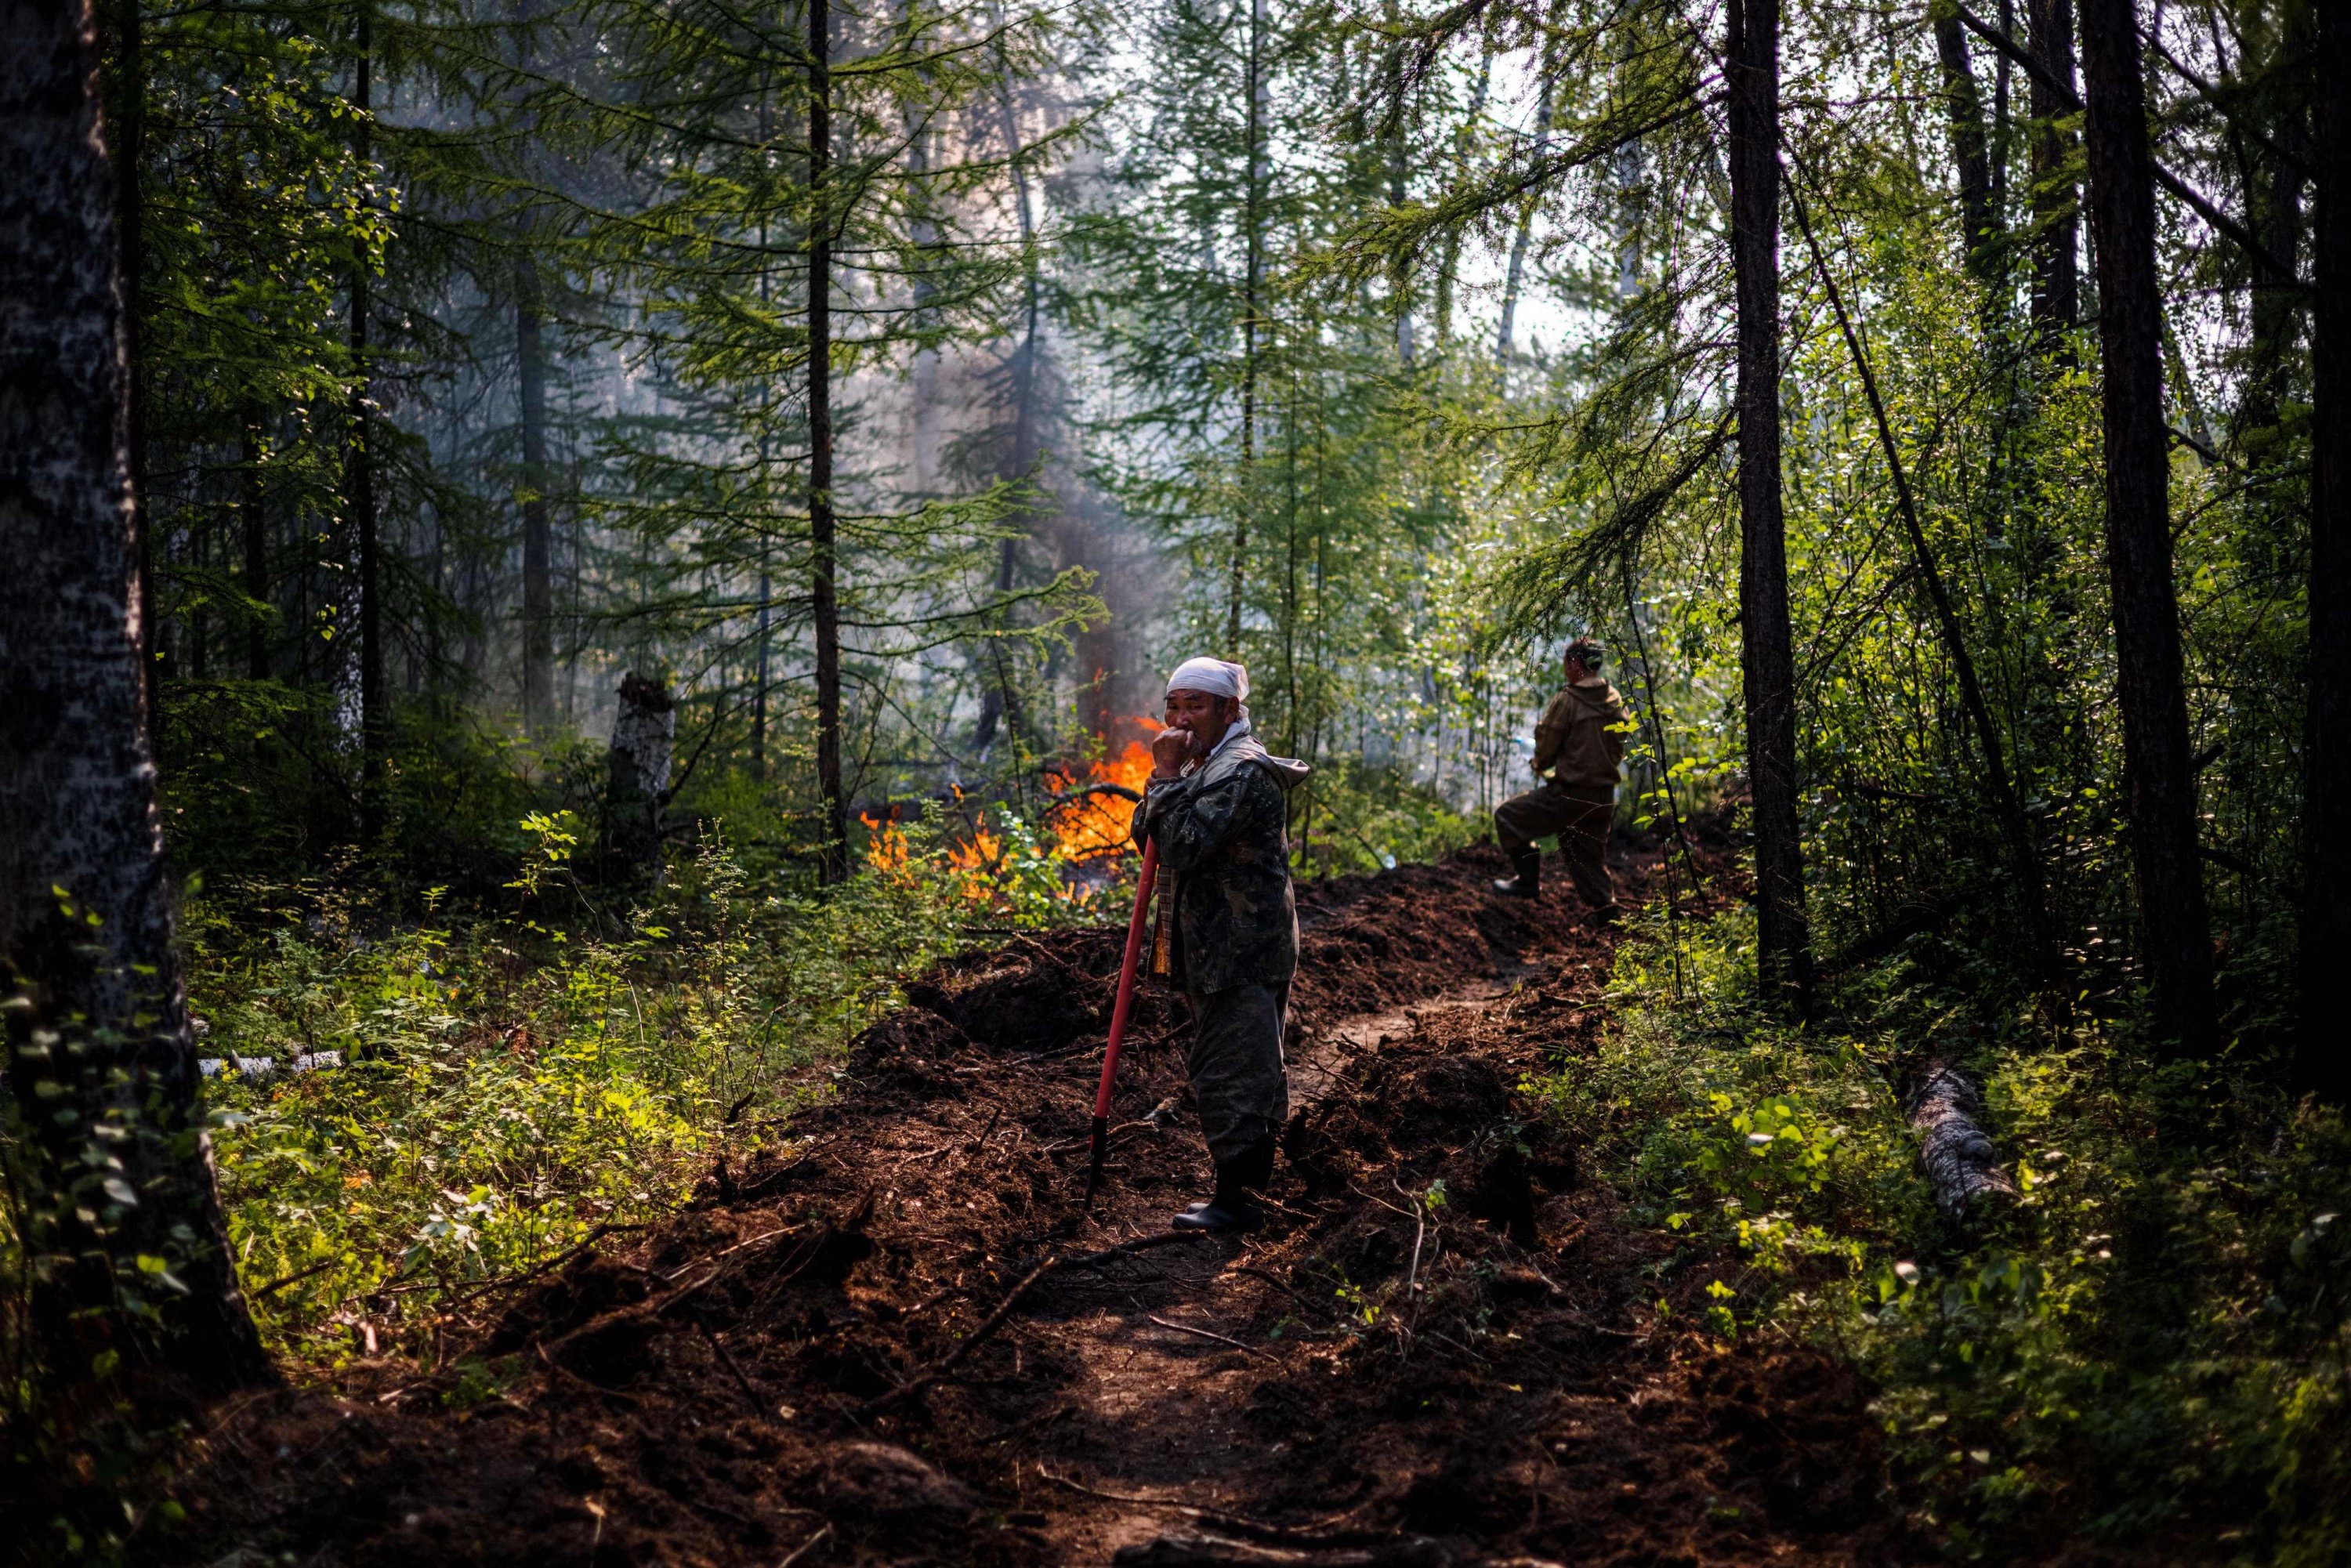  Ivan Fyodorov, 65, helps firefighters to control a five-kilometer long trench - that they dug with a tractor some days earlier - to prevent a wildfire from reaching their land in the Siberian region of Yakutia, at the edge of the village of Byas-Kyuel, on July 26, 2021.  (AFP Photo)